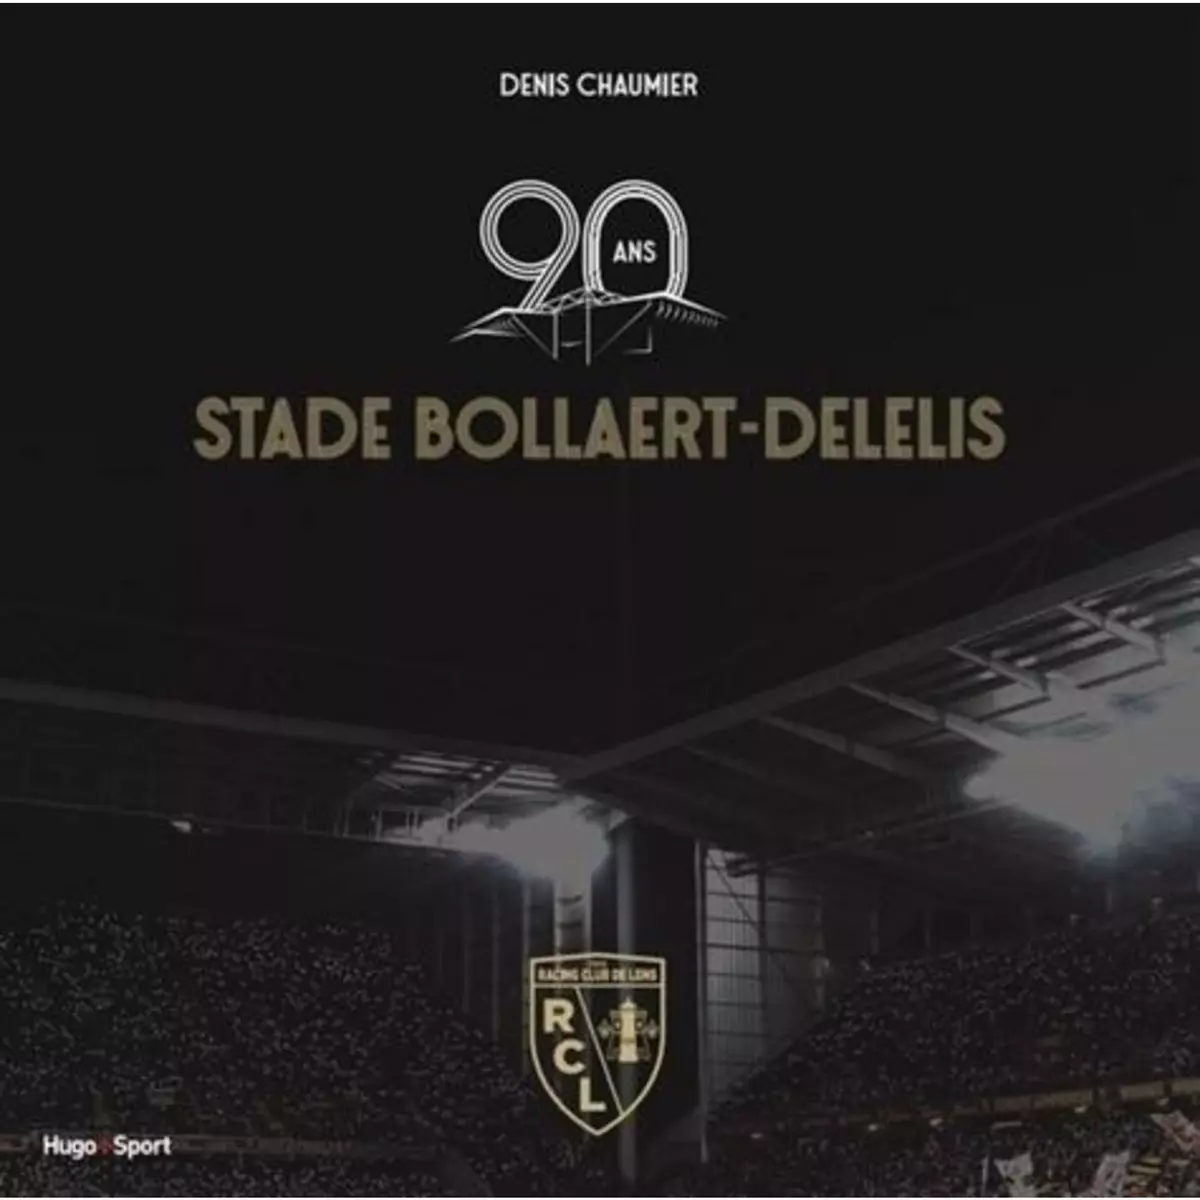  90 ANS STADE BOLLAERT-DELELIS, Chaumier Denis